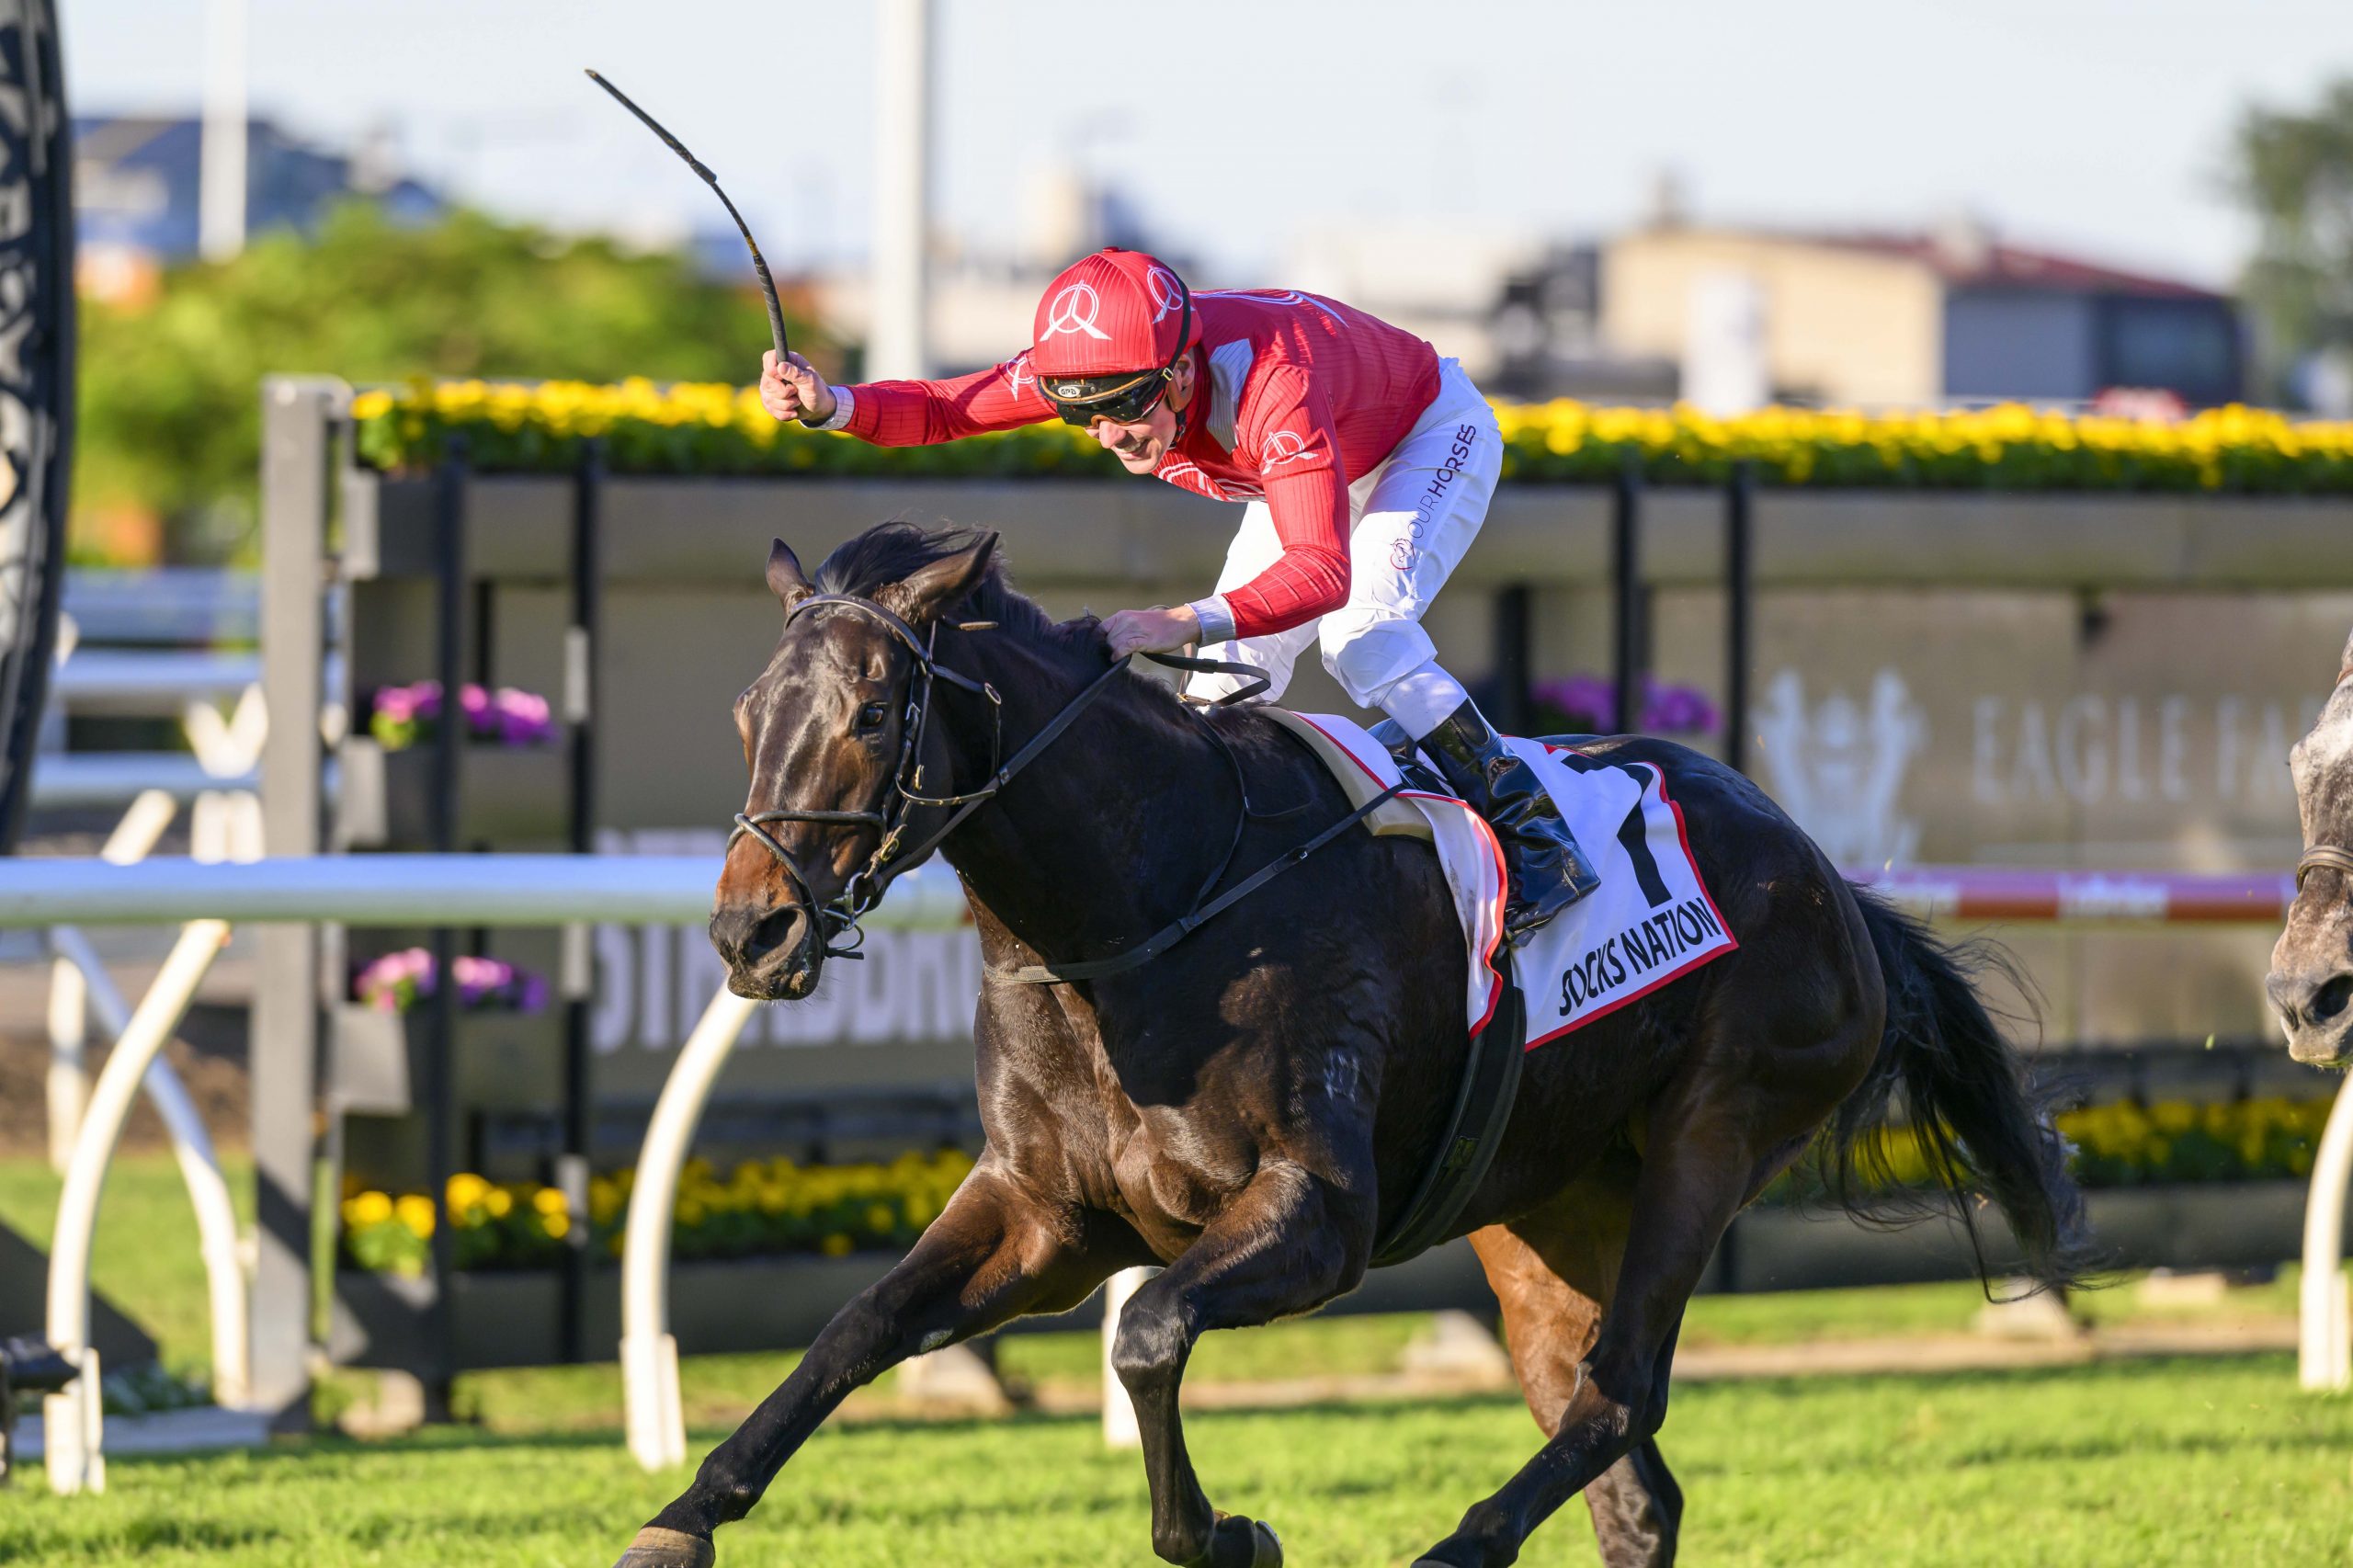 Socks Nation is a fascinating filly – the Ciaron Maher-trained 3YO has raced 12 times and never had a spell, enjoying Gr1 success in what is her first preparation